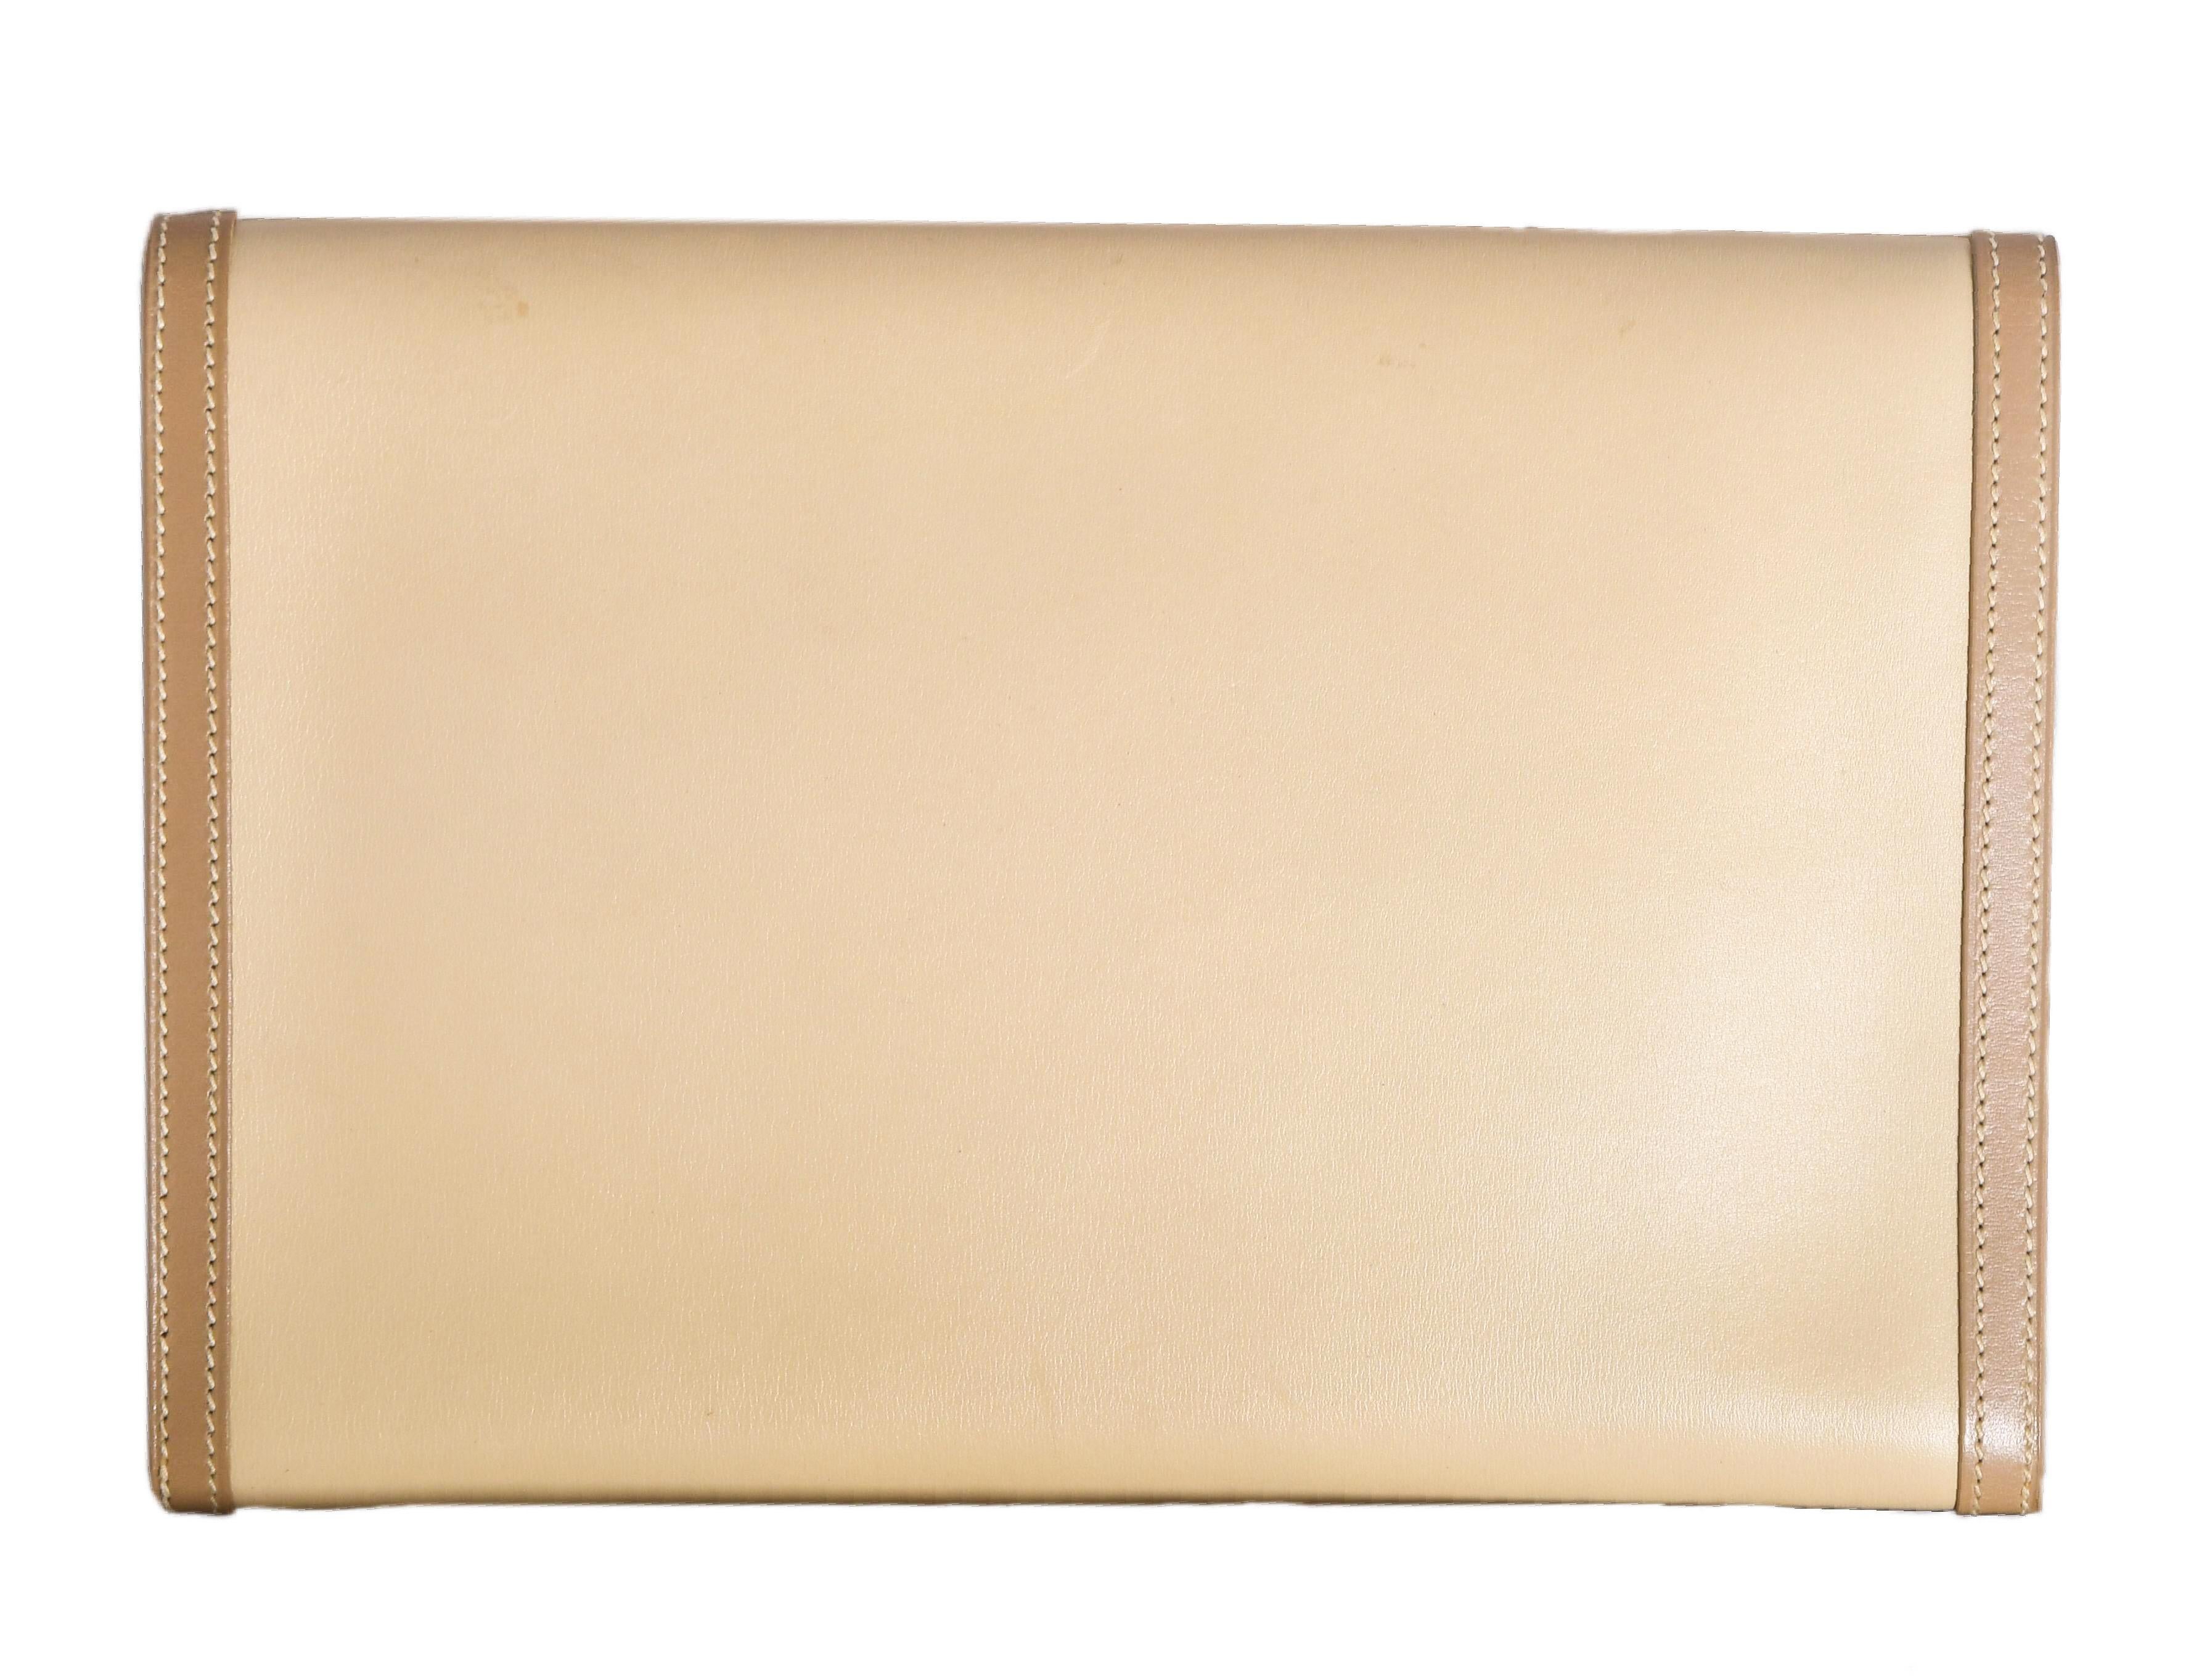 Hermes beige leather envelope flap bag is trimmed in tan leather around the sides and on the flap.  This evening clutch is lined in same beige color leather as on the exterior.  With a single interior pocket, it does contain any other pockets.  For